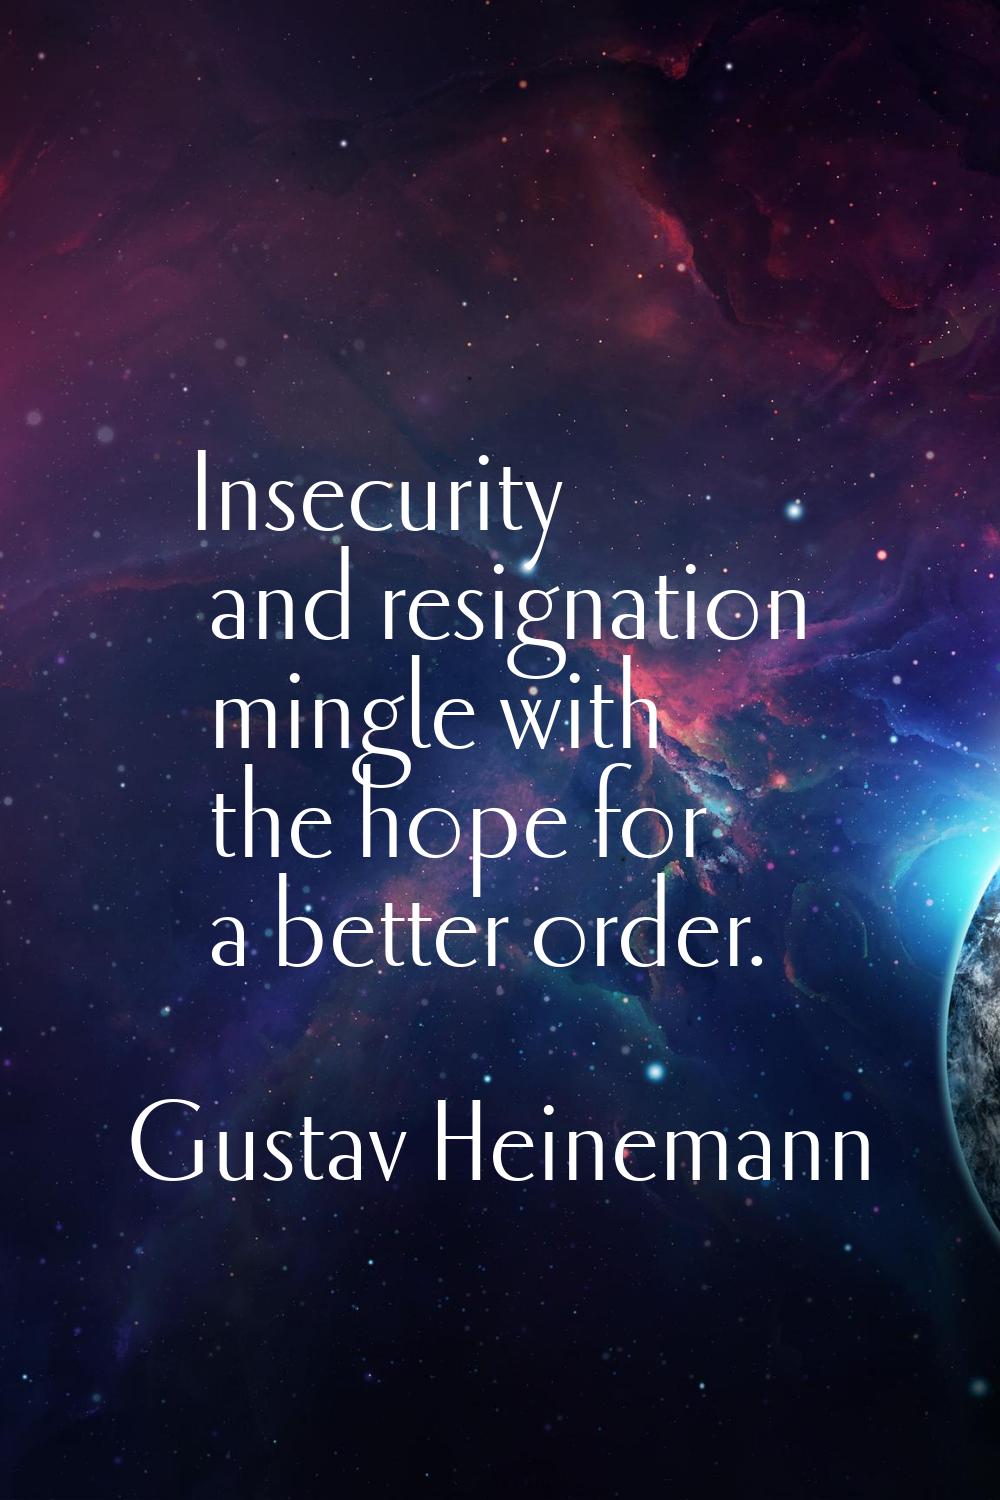 Insecurity and resignation mingle with the hope for a better order.